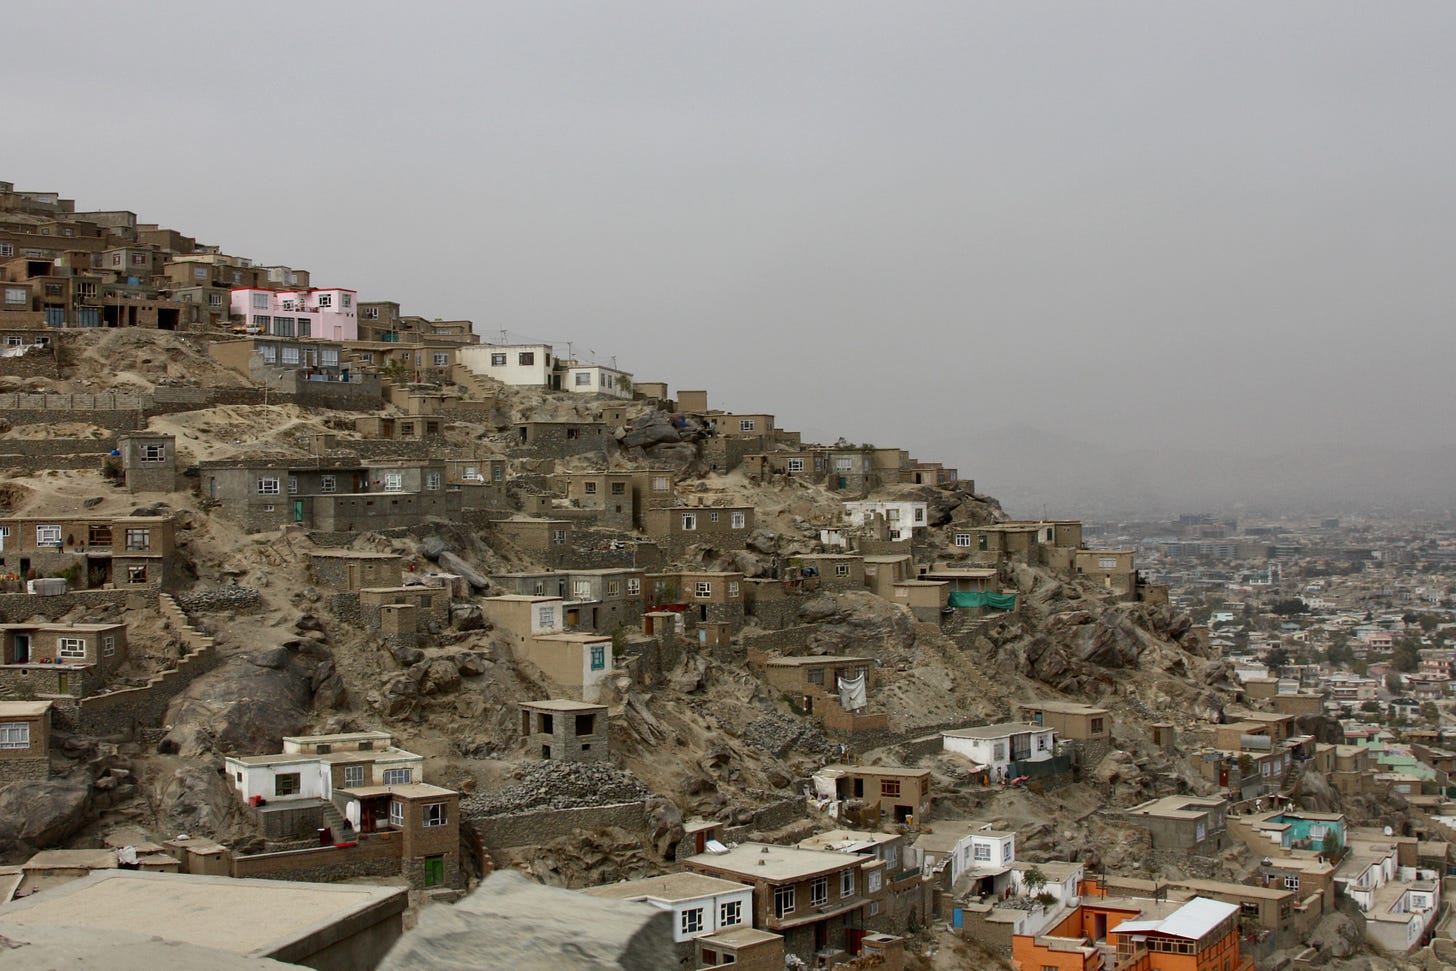 Brown mountain peak rises in Kabul with rudimentary houses clinging to the side of the peak and dense development on the valley below